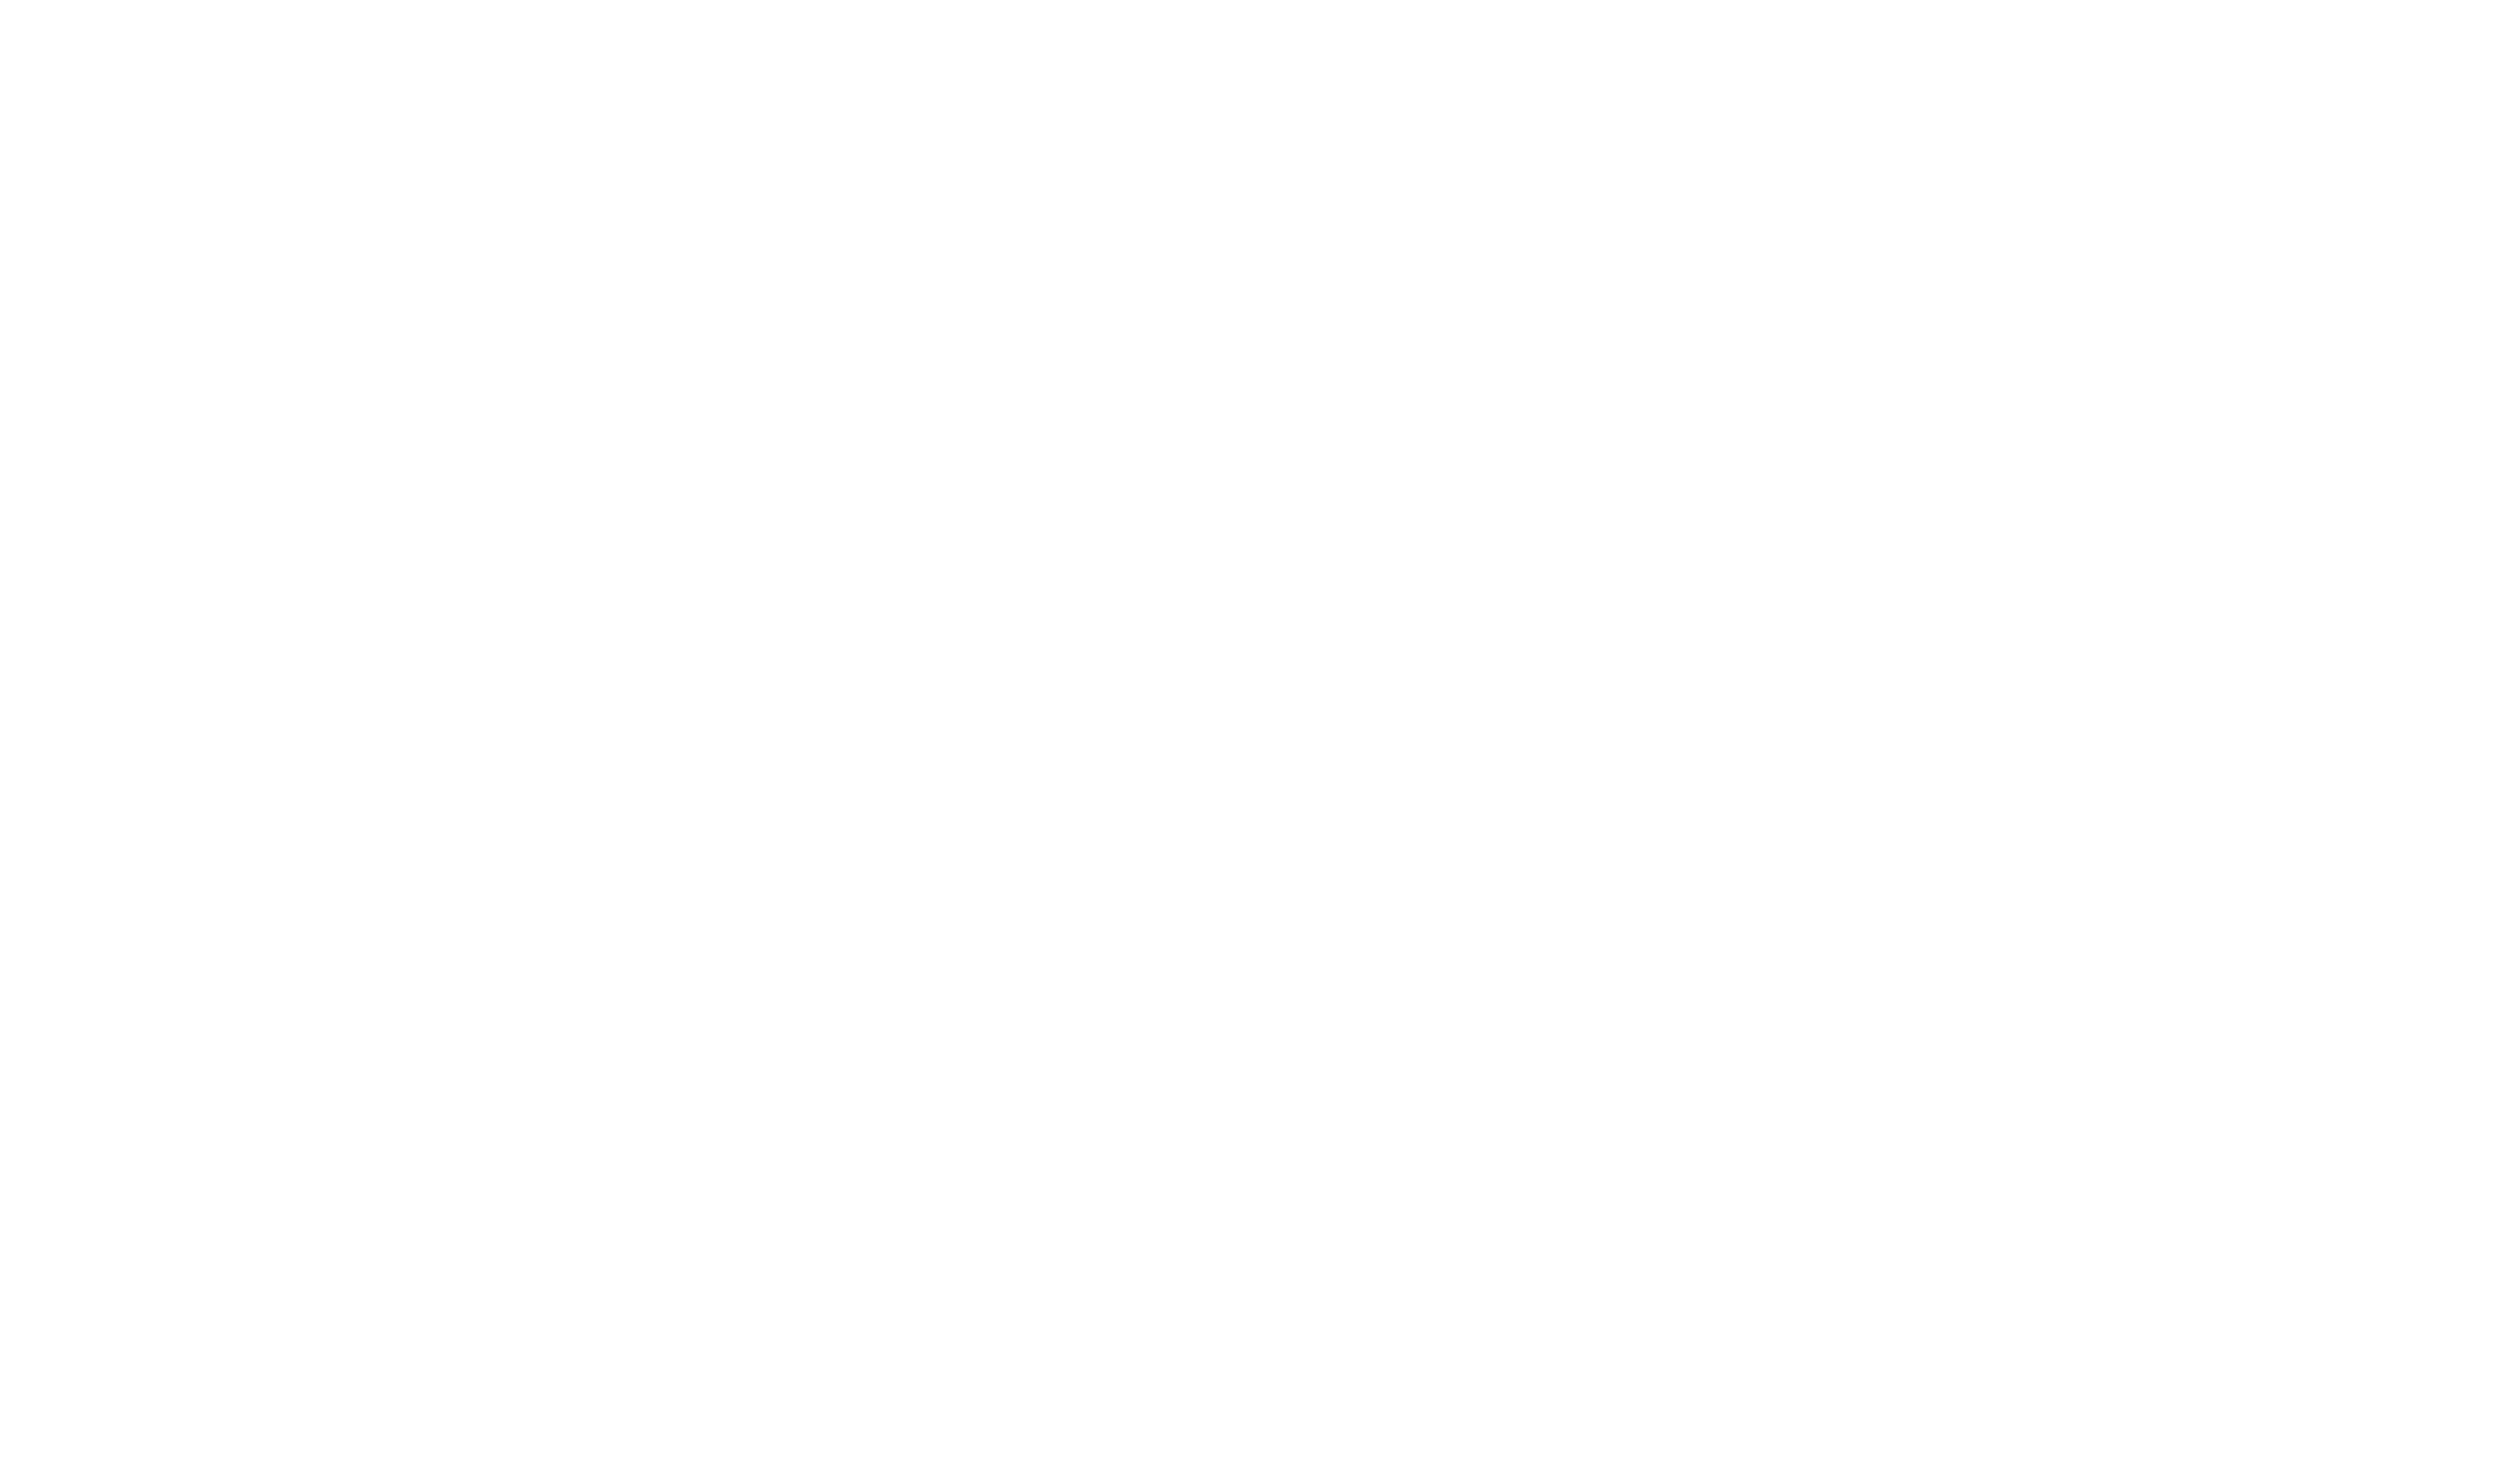 Transparent overlay with blueprint drawings